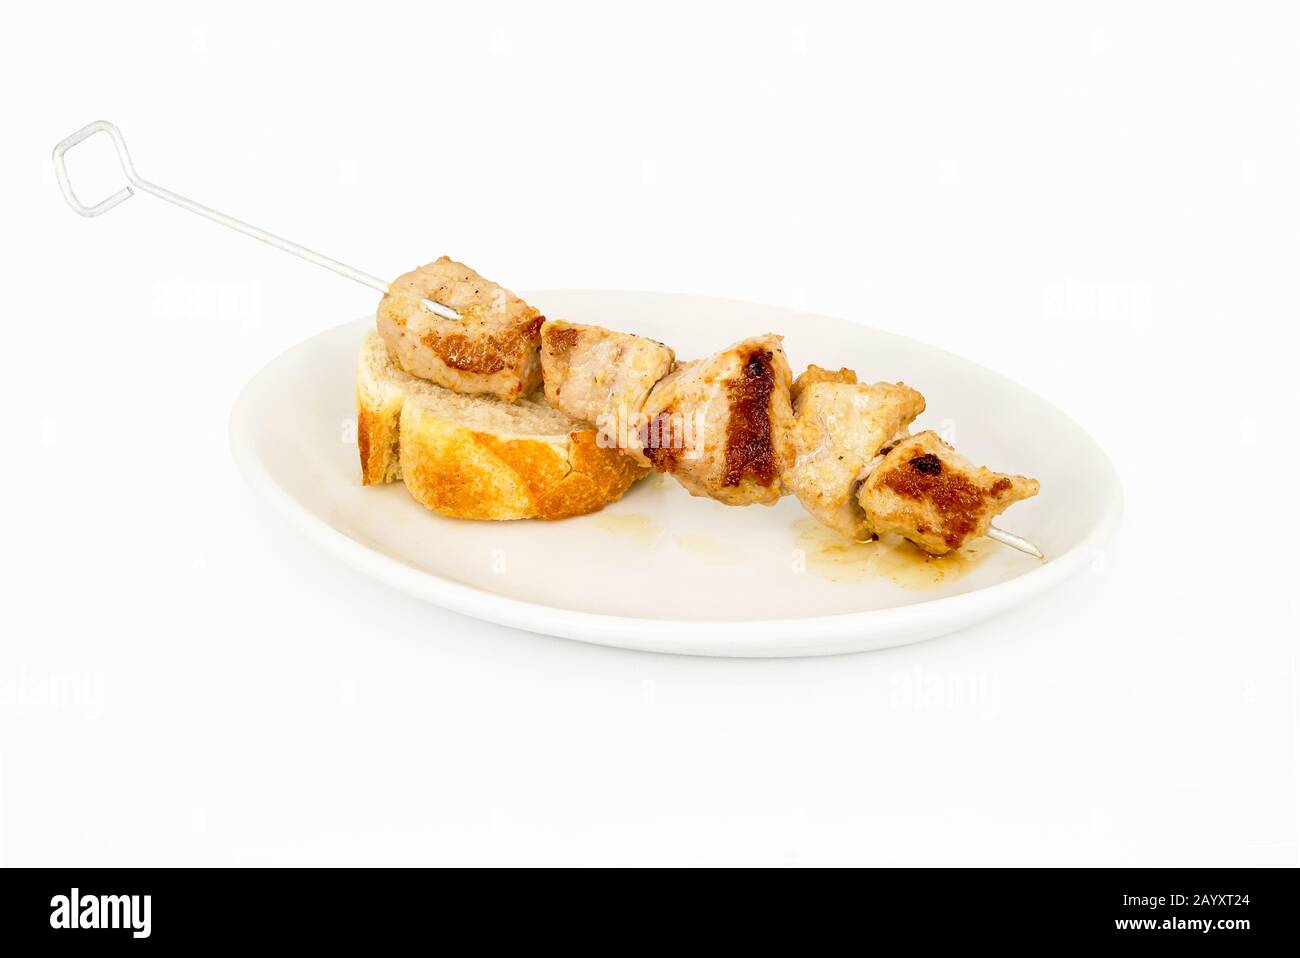 Skewer of meat on a slice of bread and on top of a white plate. Stock Photo